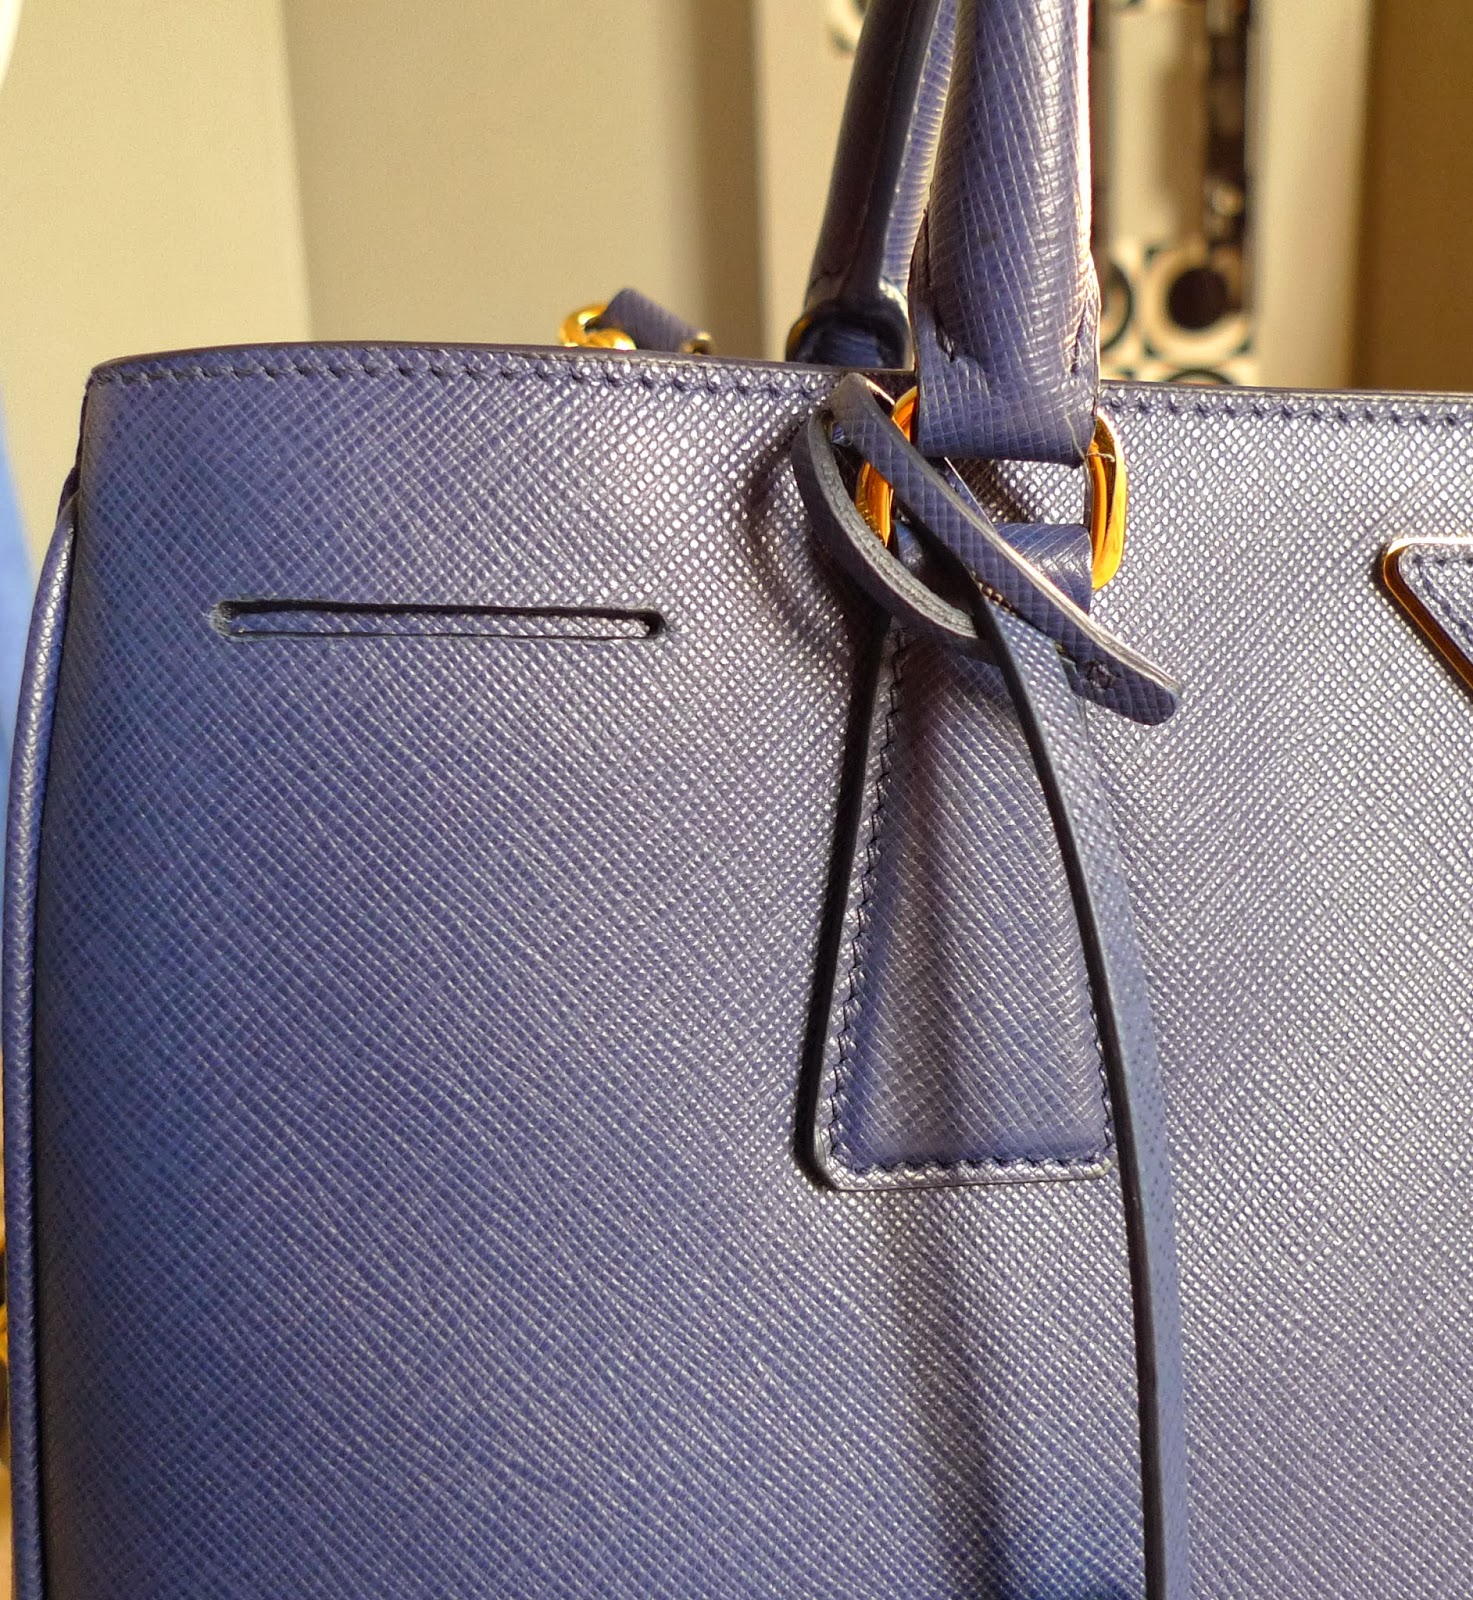 How bad (or good) is this Prada saffiano lux tote rep? : r